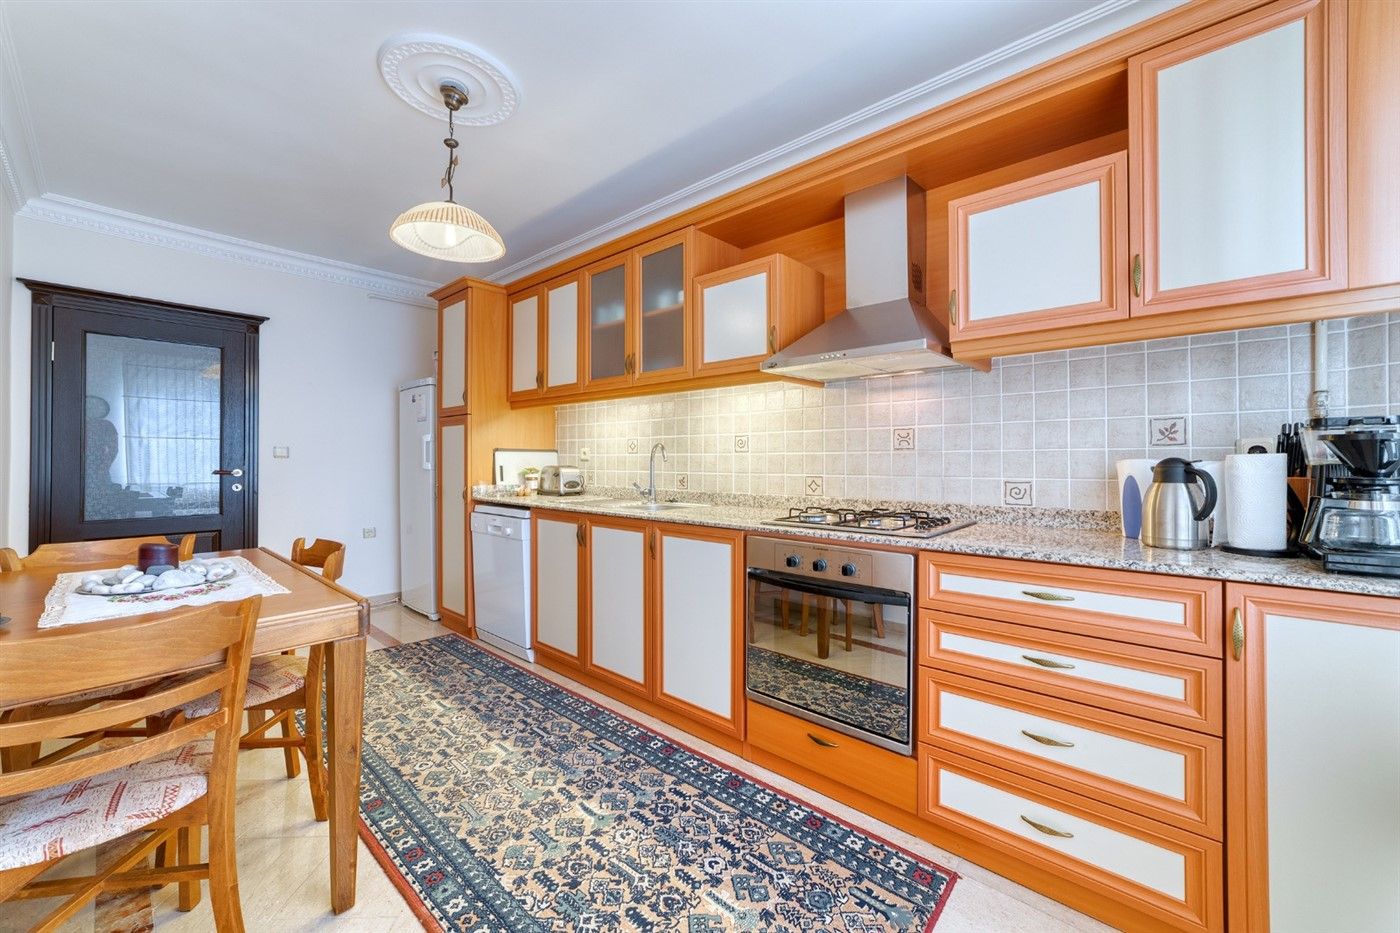 2+1 apartment with separate kitchen